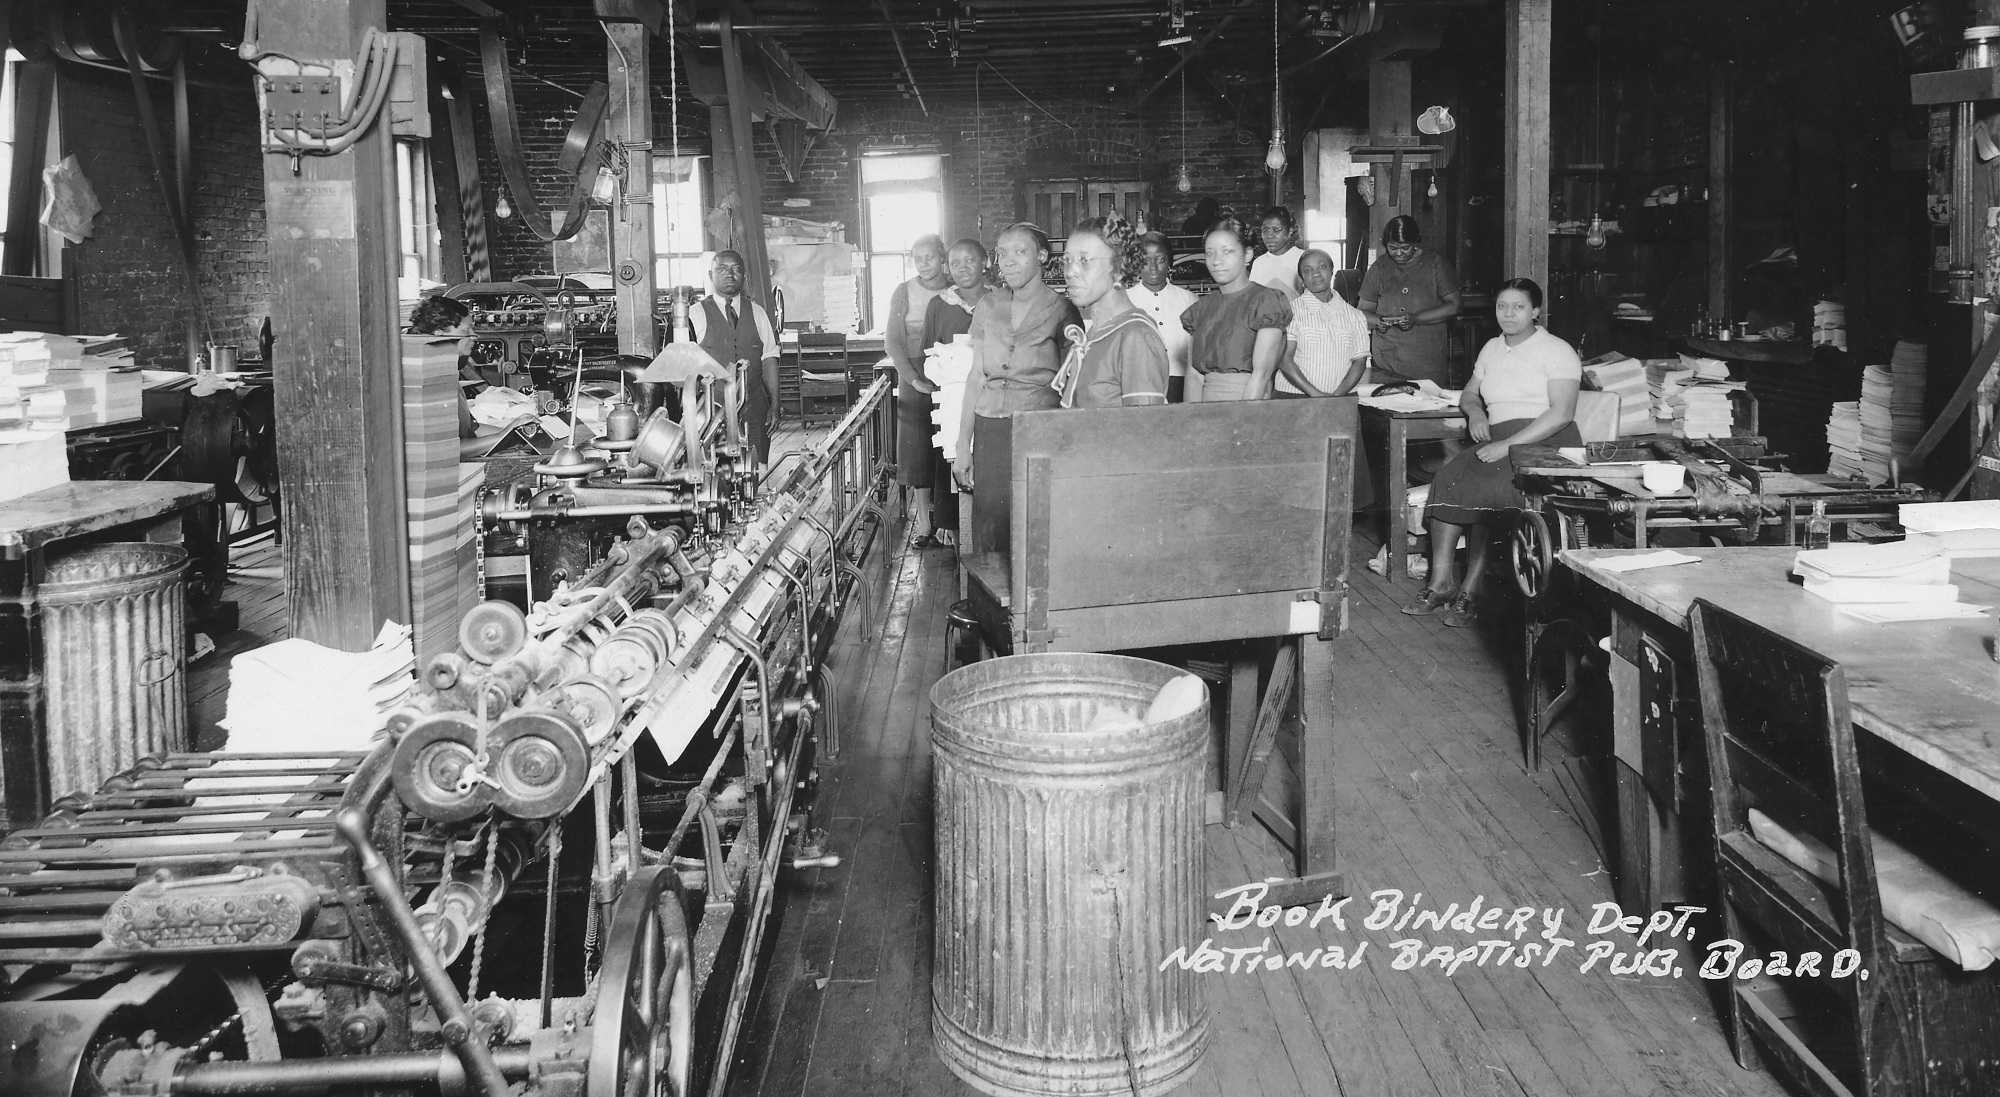 Photograph of employees in the Book Bindery Department